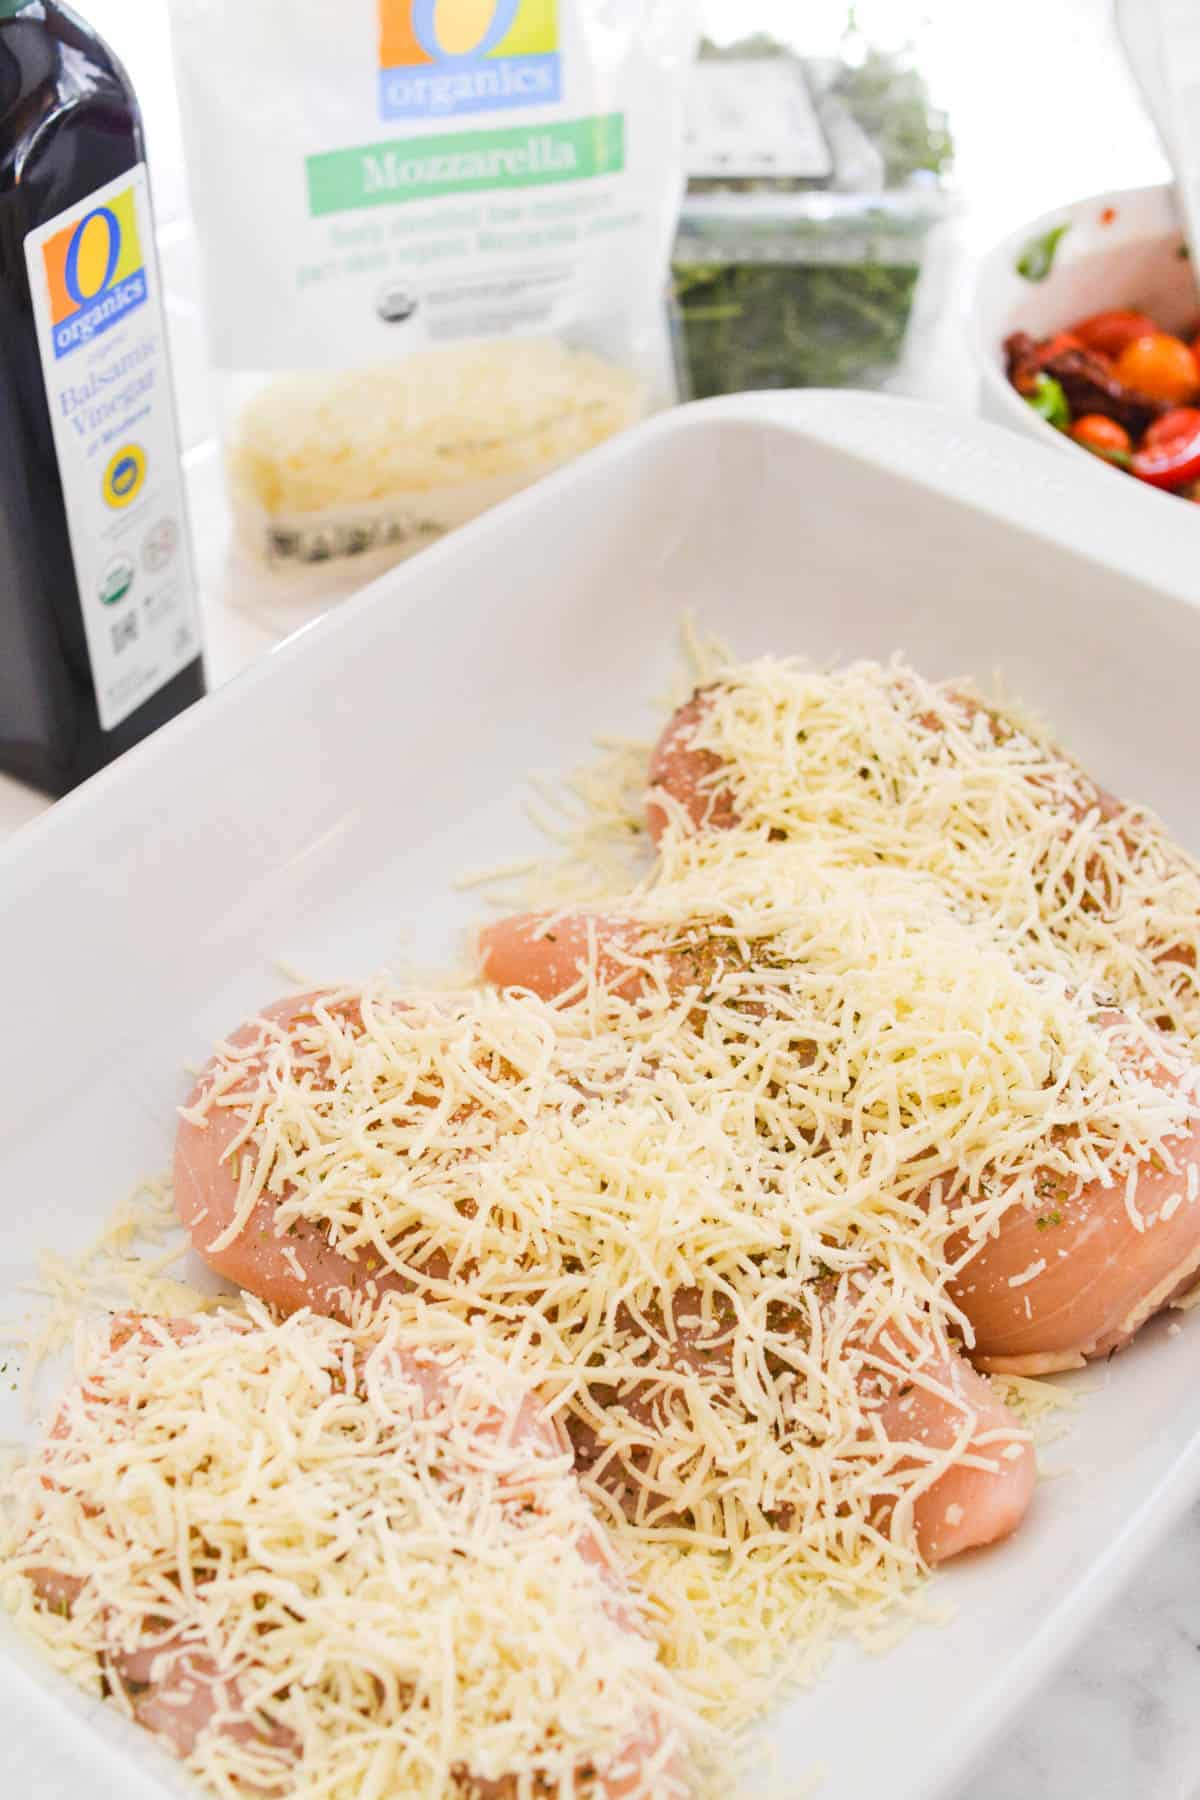 Raw chicken breasts in a baking dish topped with shredded mozzarella cheese.